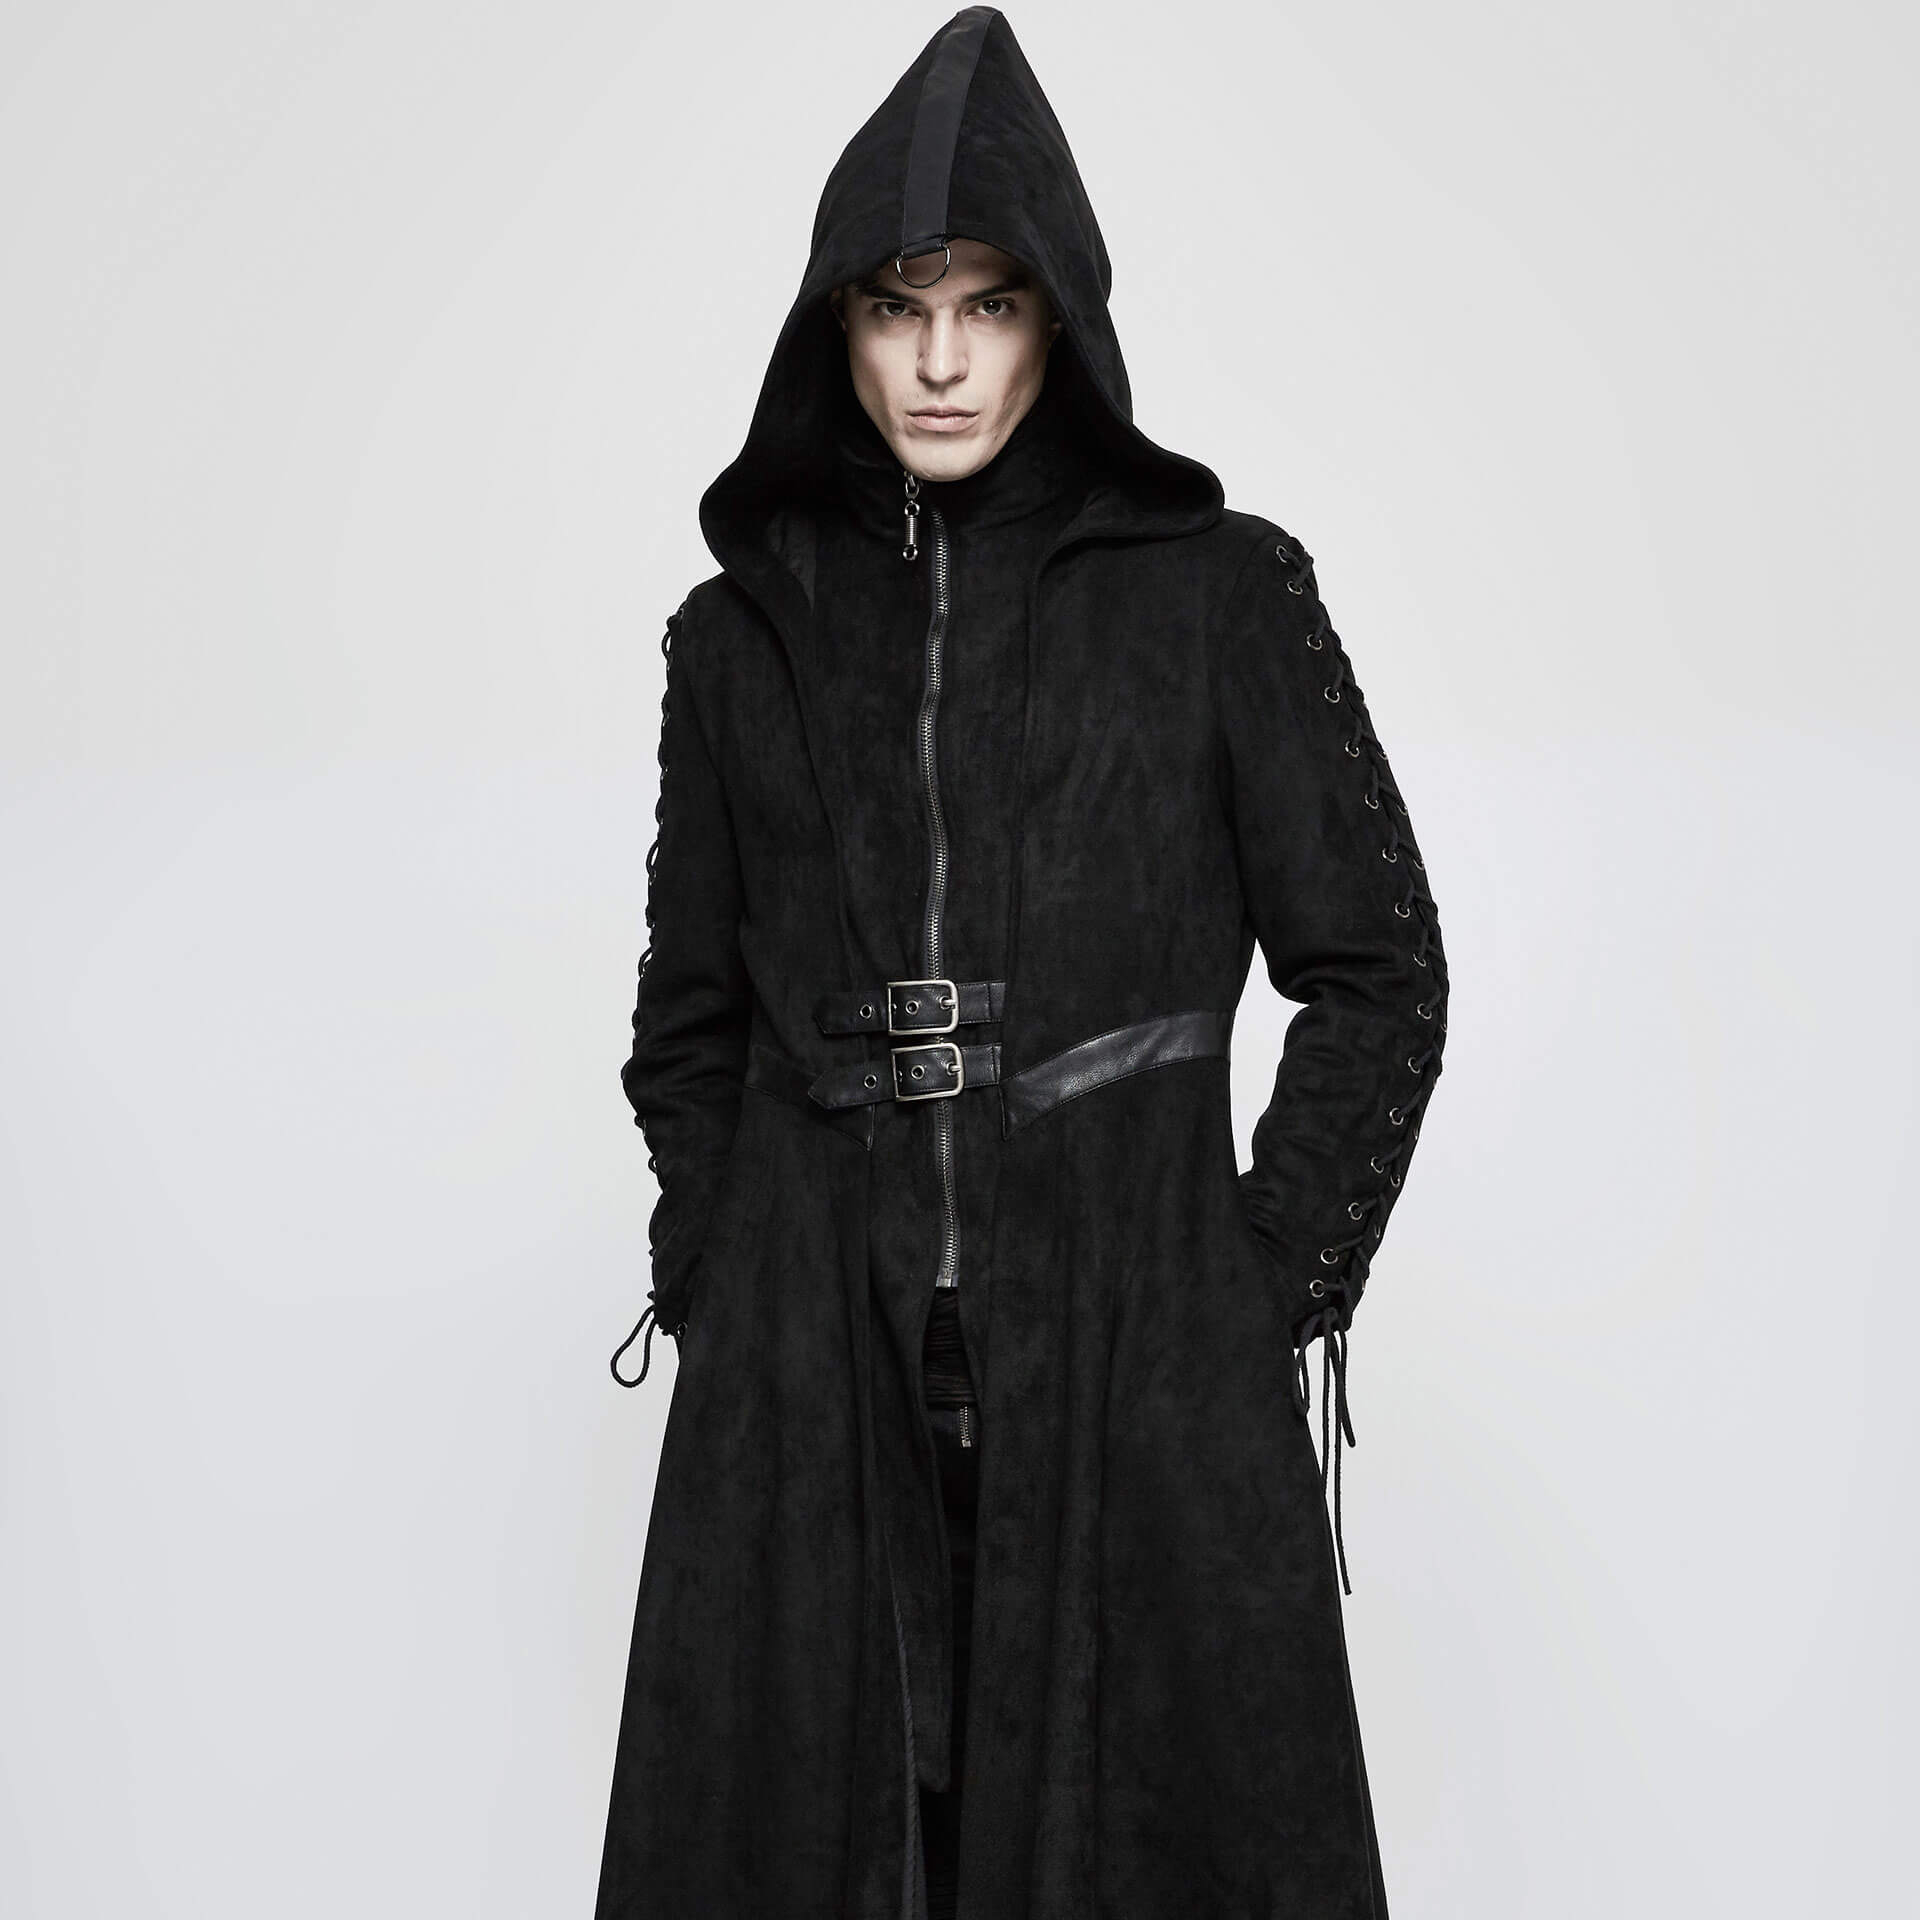 Rune Witcher Coat by Punk Rave brand